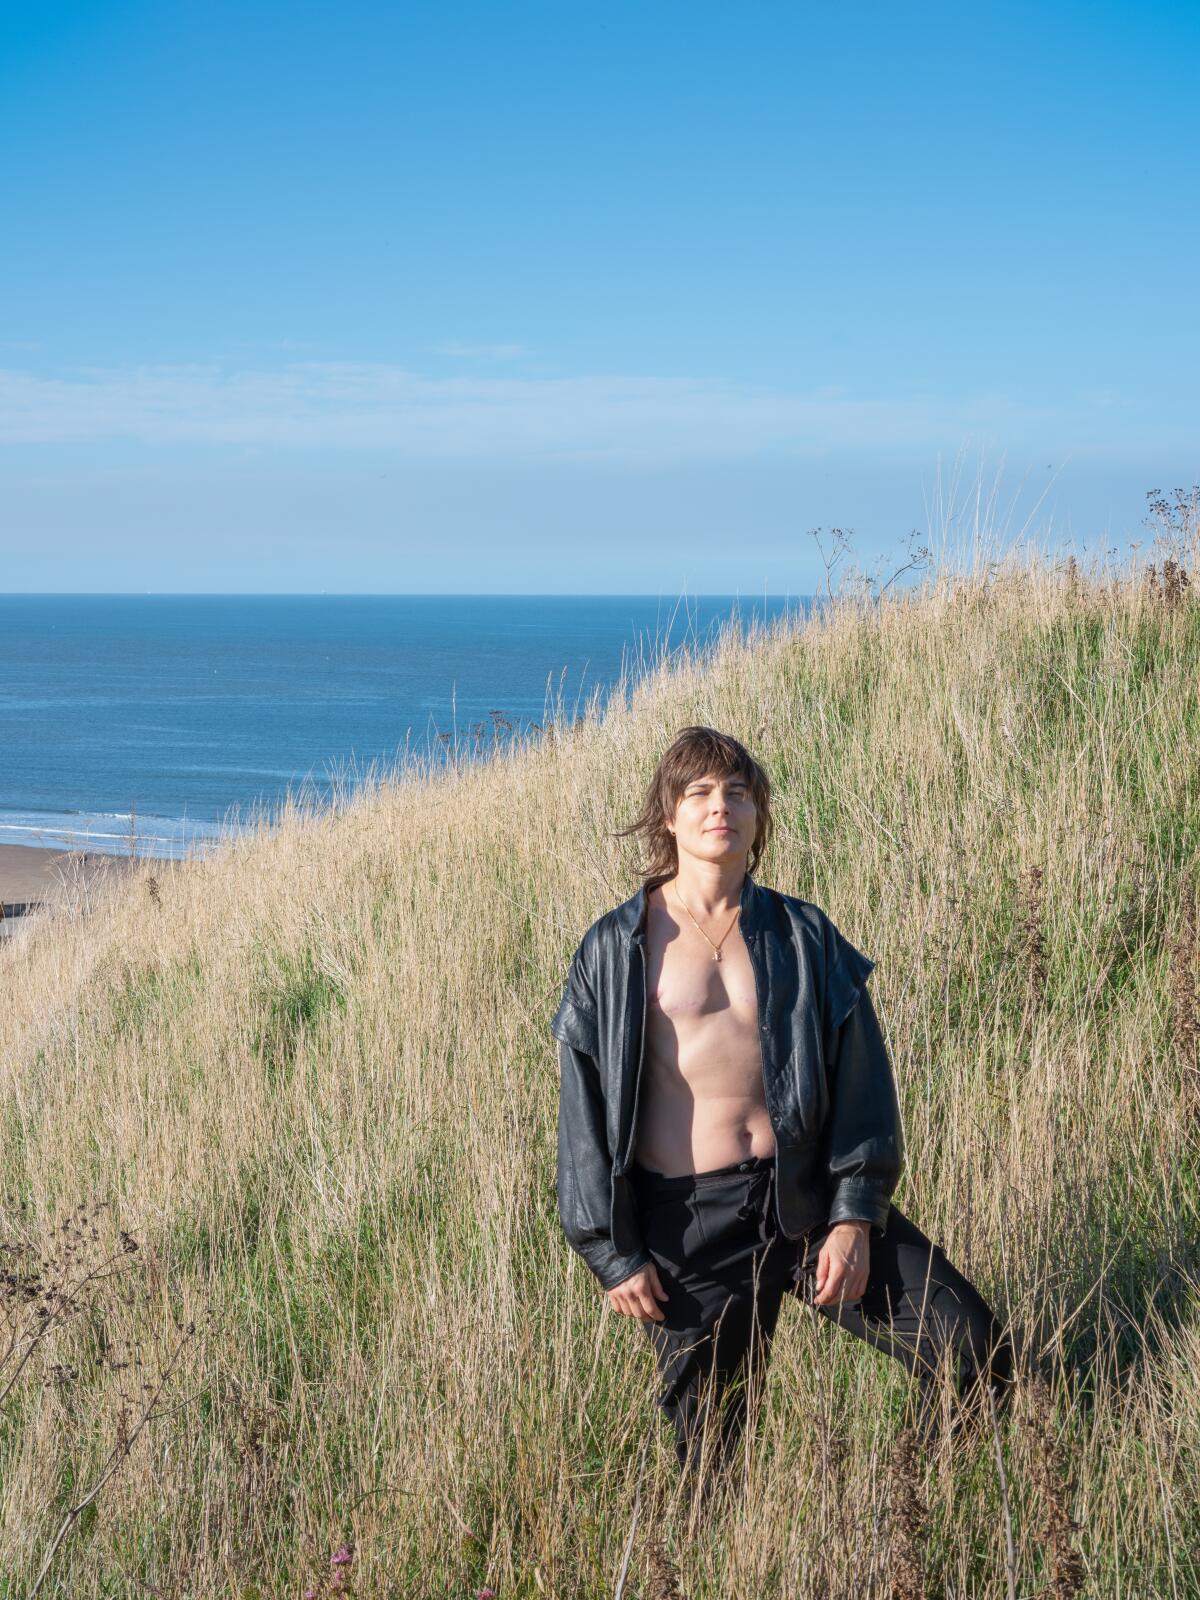 A nonbinary trans man stands in a field of sea grass in an open sweatshirt